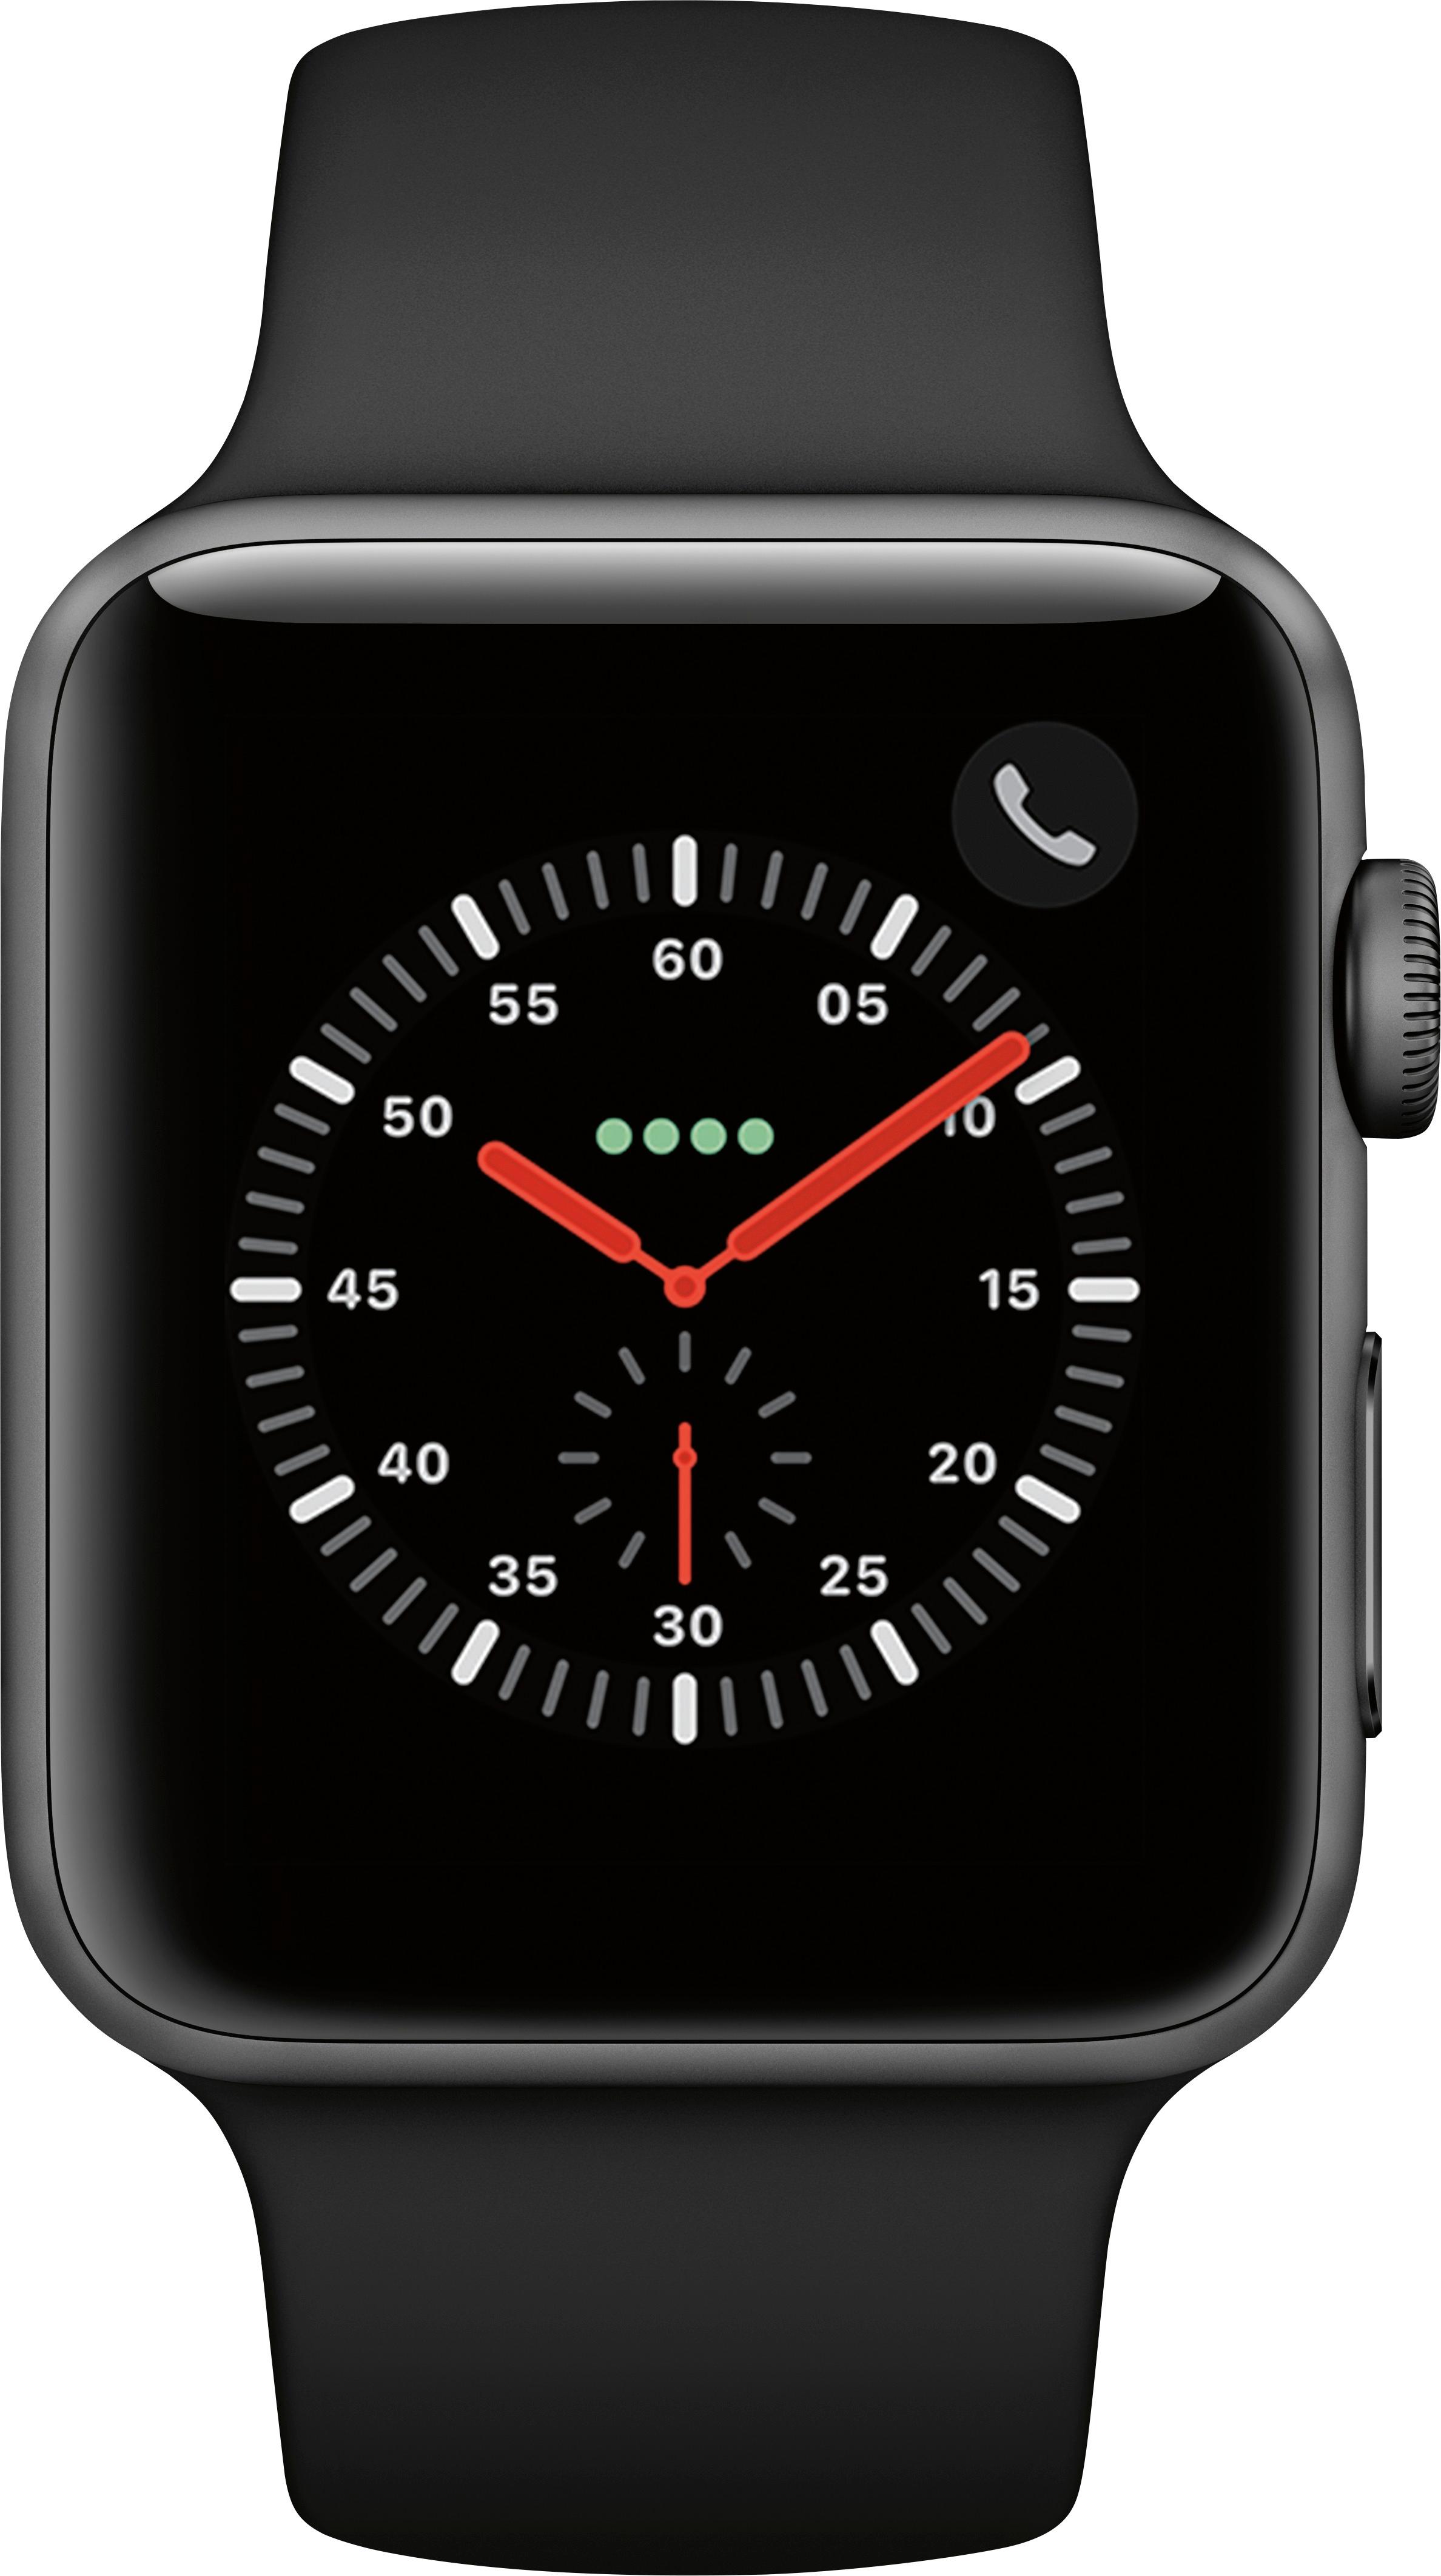 Apple Watch Series 3 - Technical Specifications